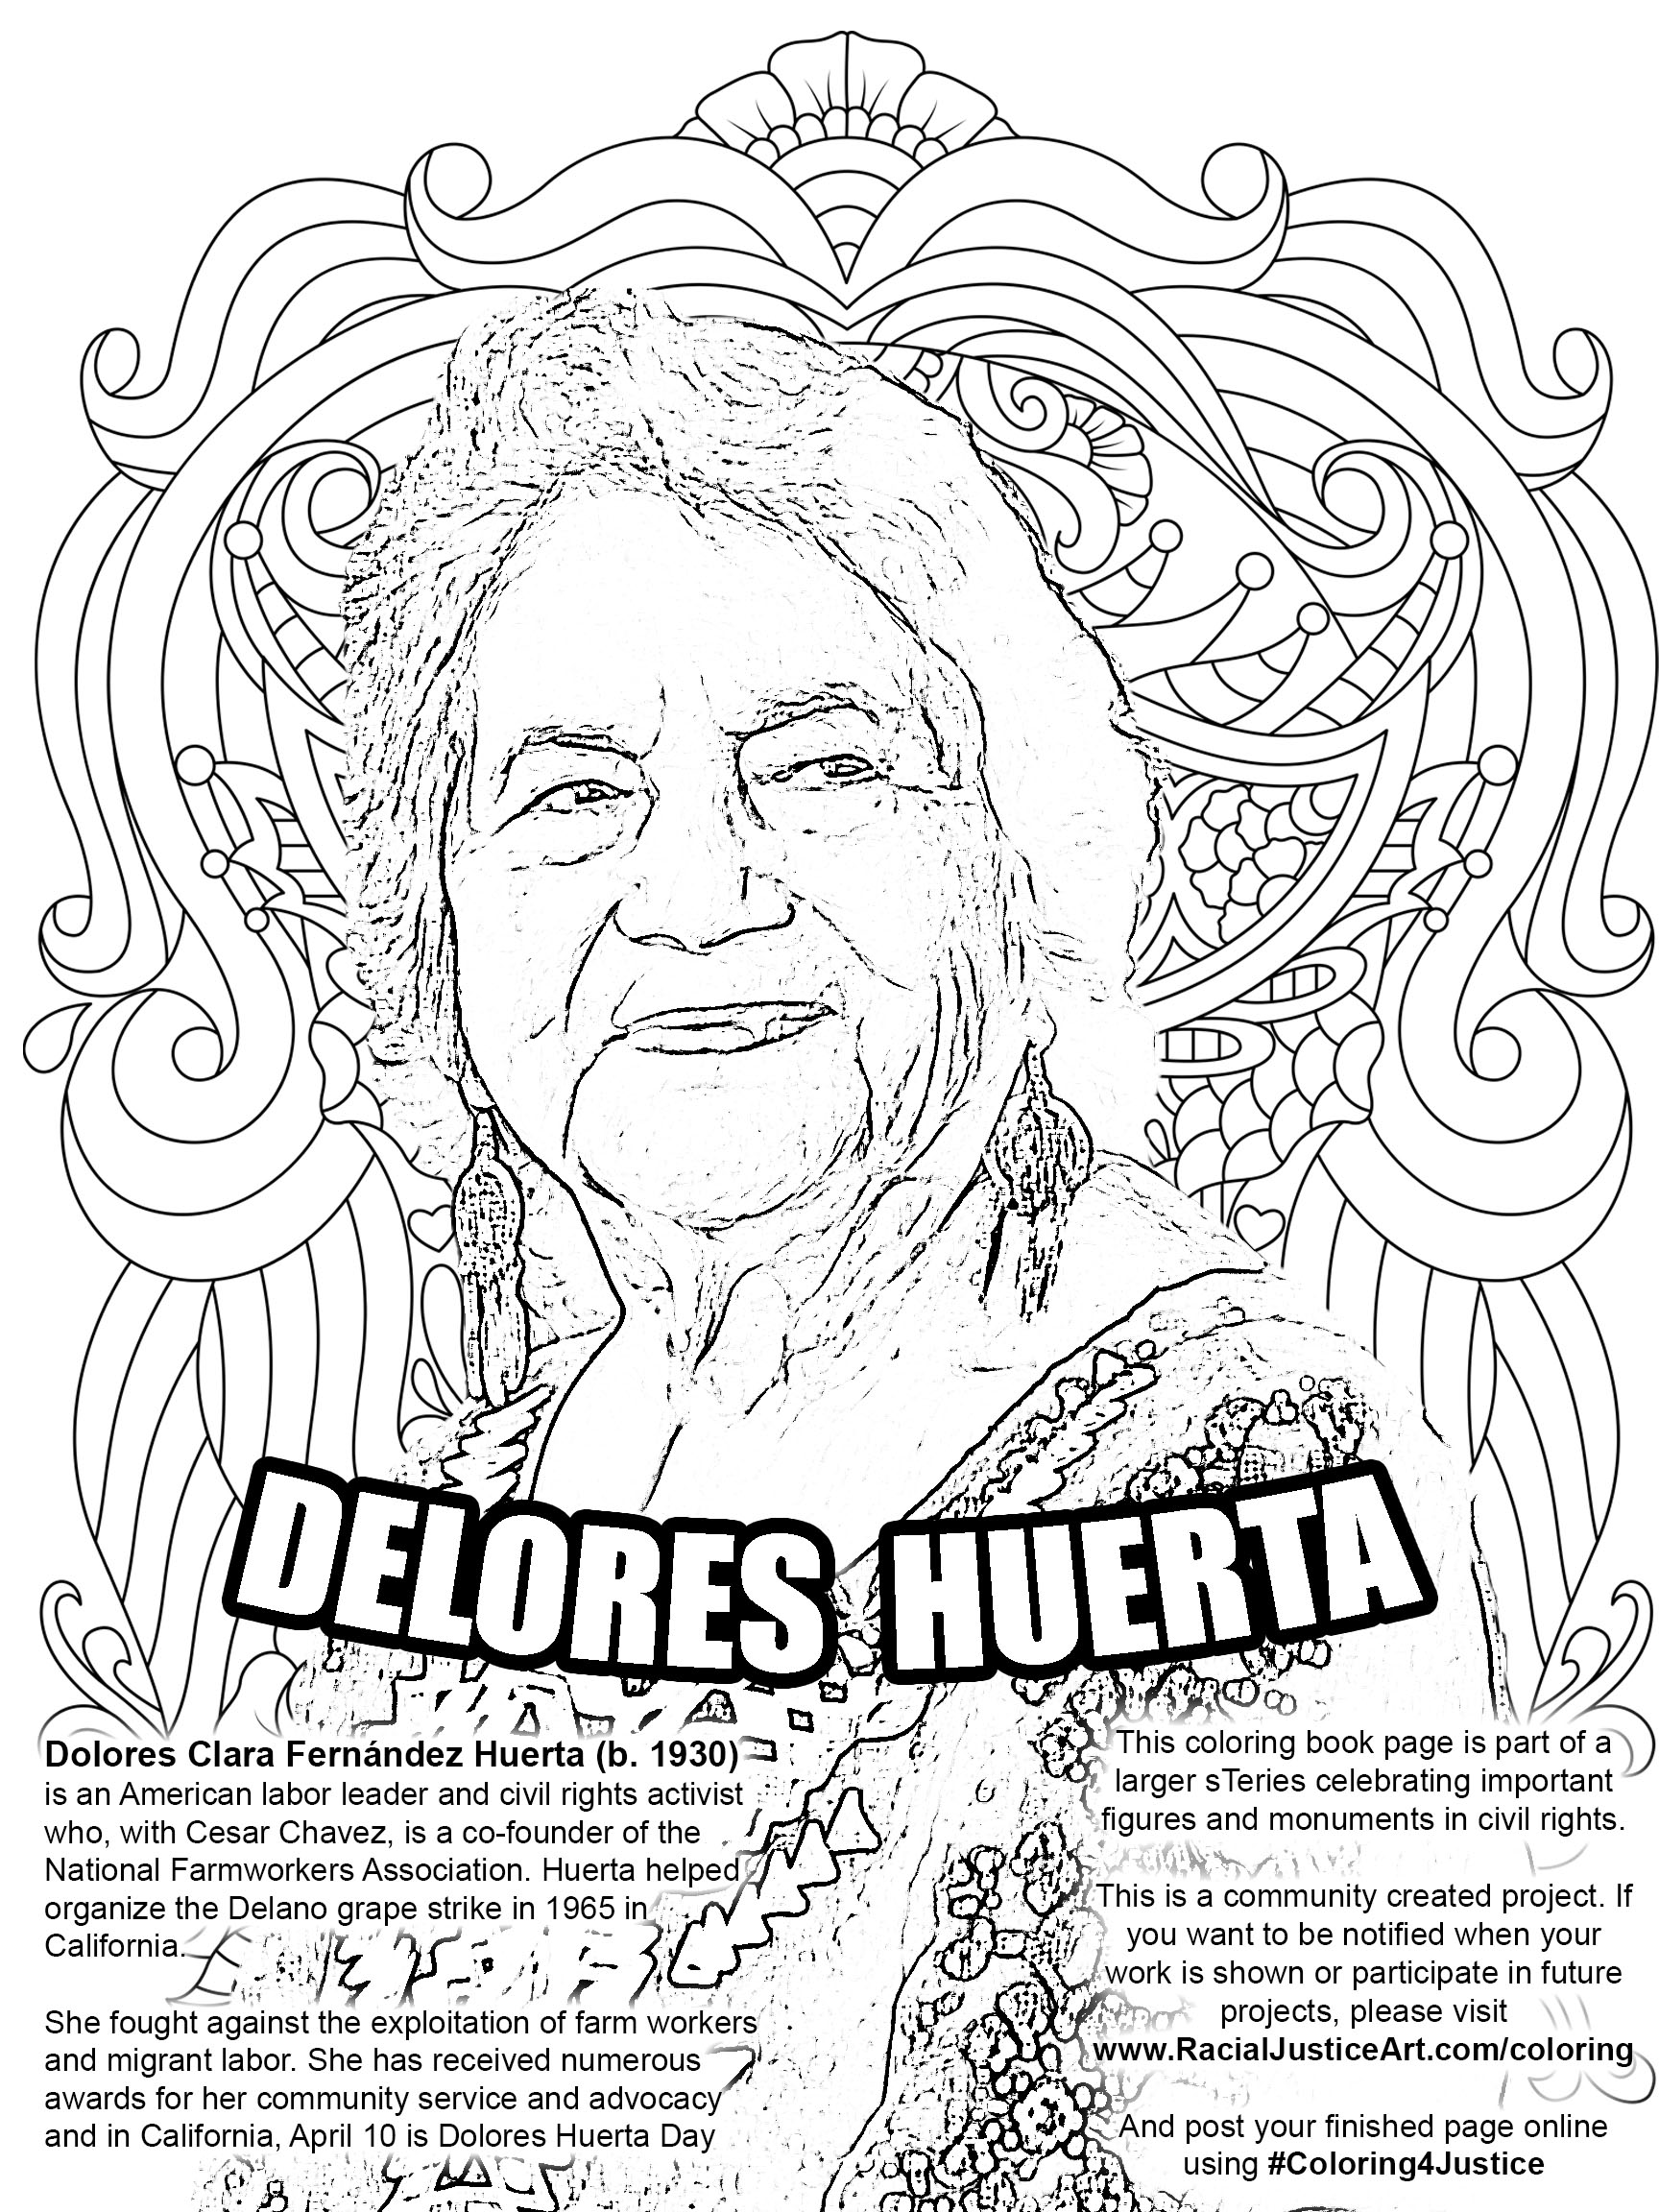 Public art for racial justice education on x delores huerta coloringbook page such an inspiring lady and came up with the slogan yes we can to help fight for farm and migrant